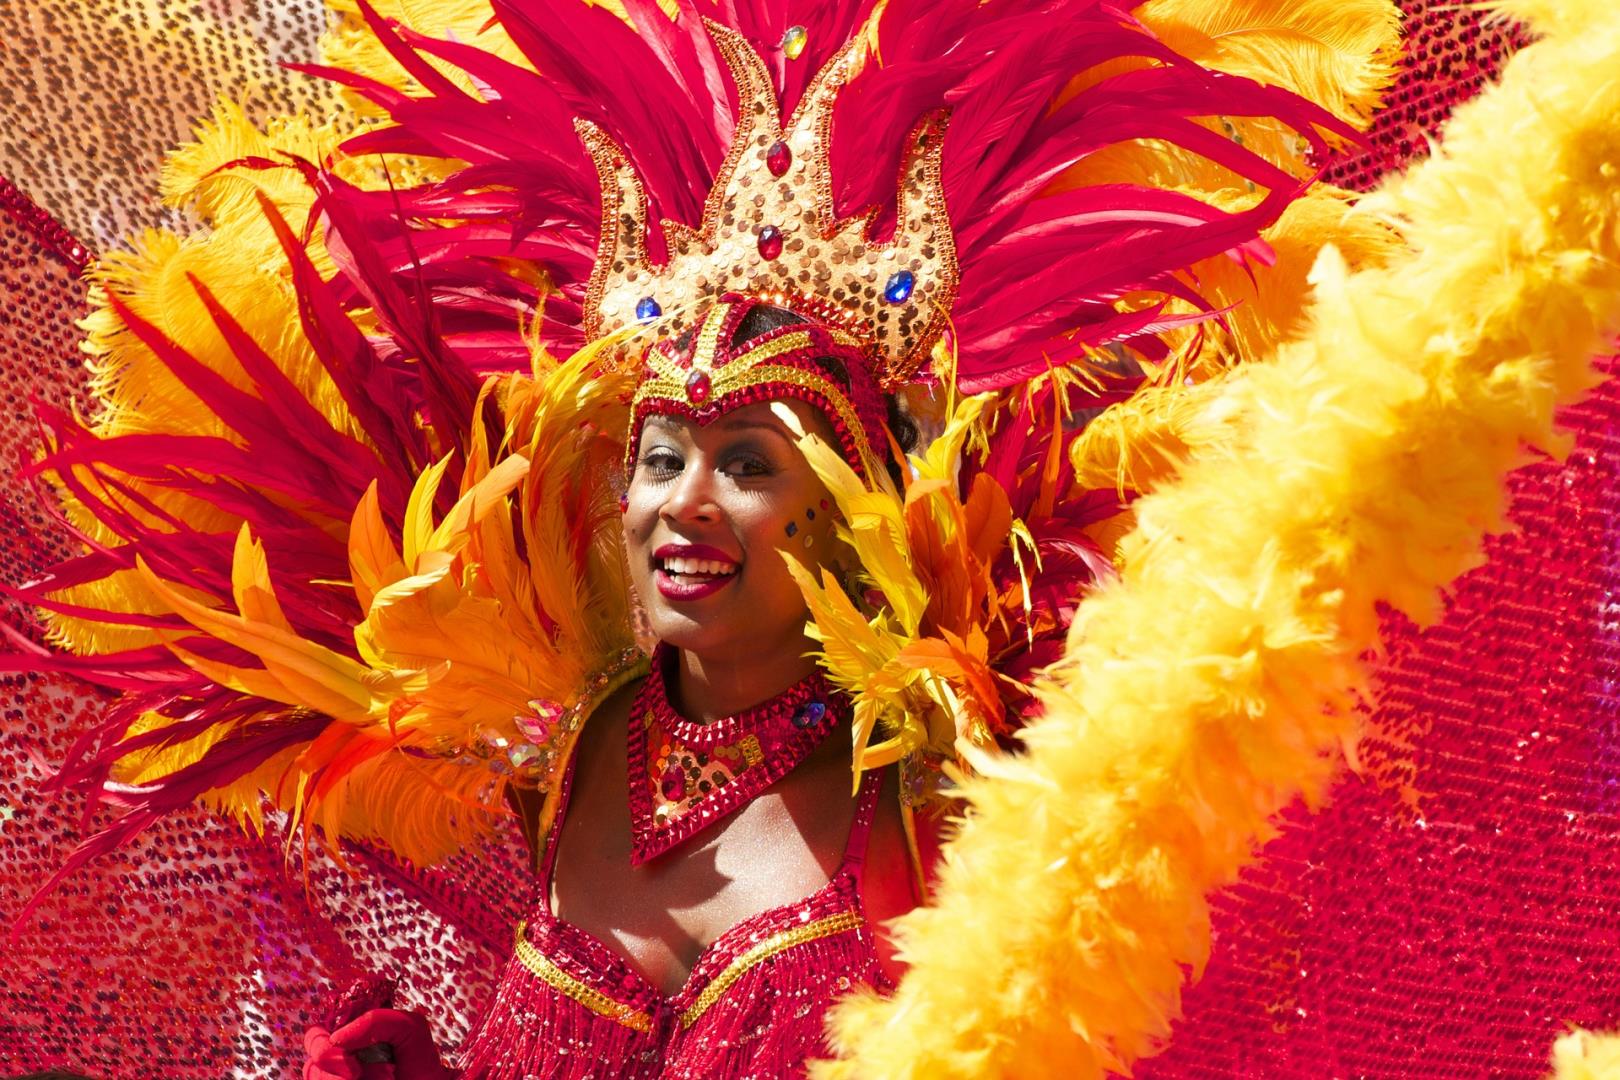 Costumed Woman in Carnival - Photo Credit: User ID 489327 via Pixabay